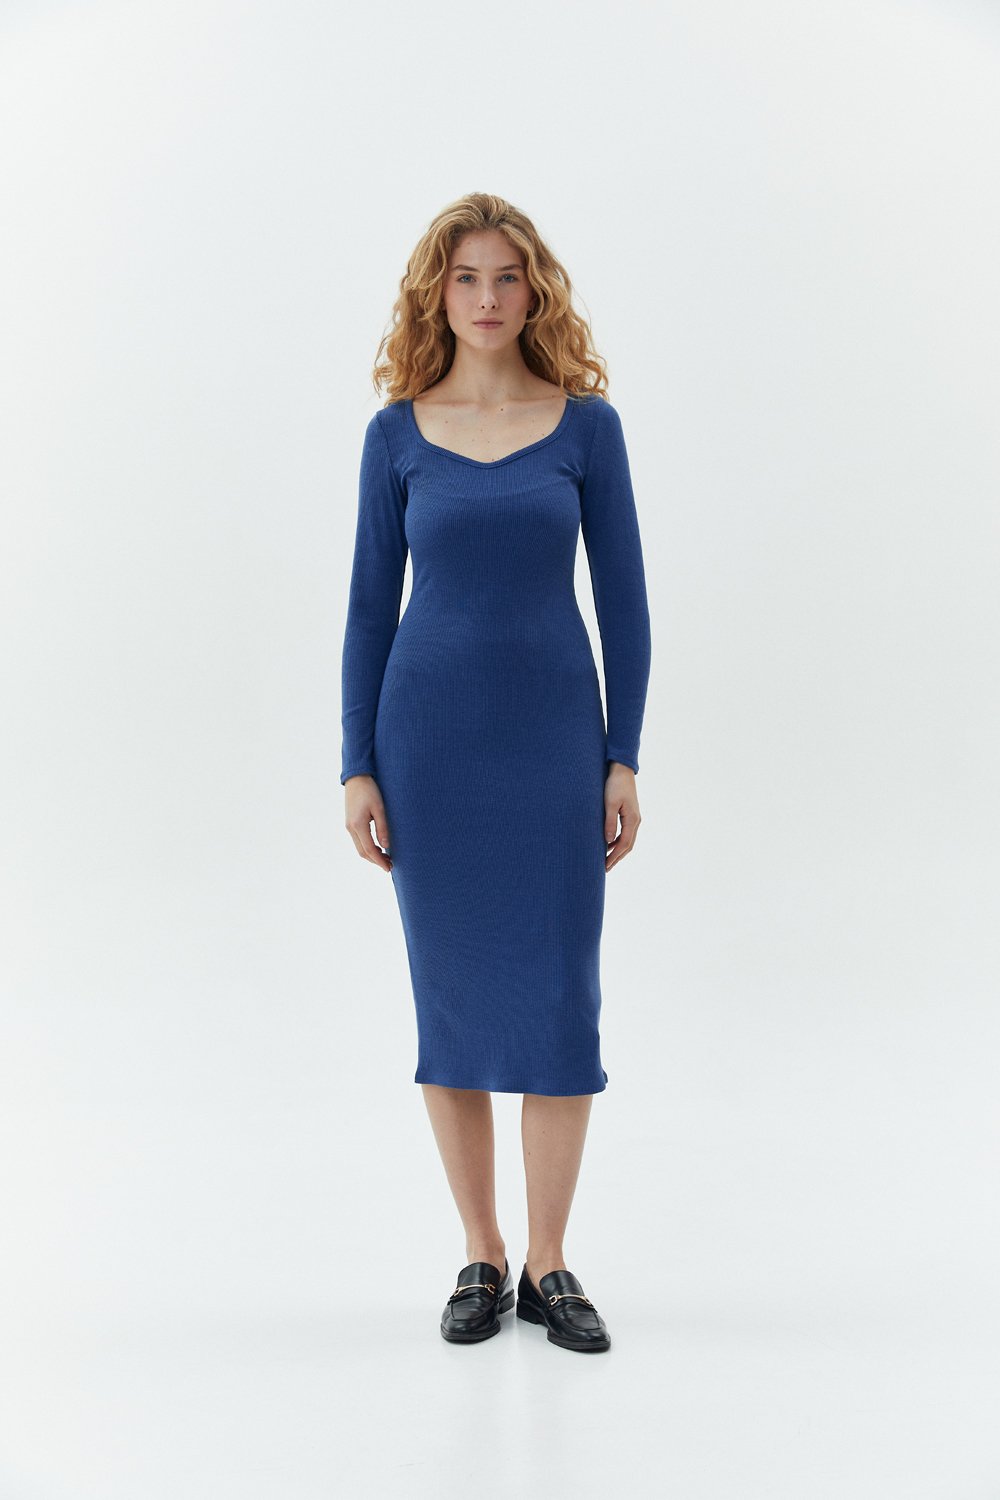 Blue long sleeve fitted dress